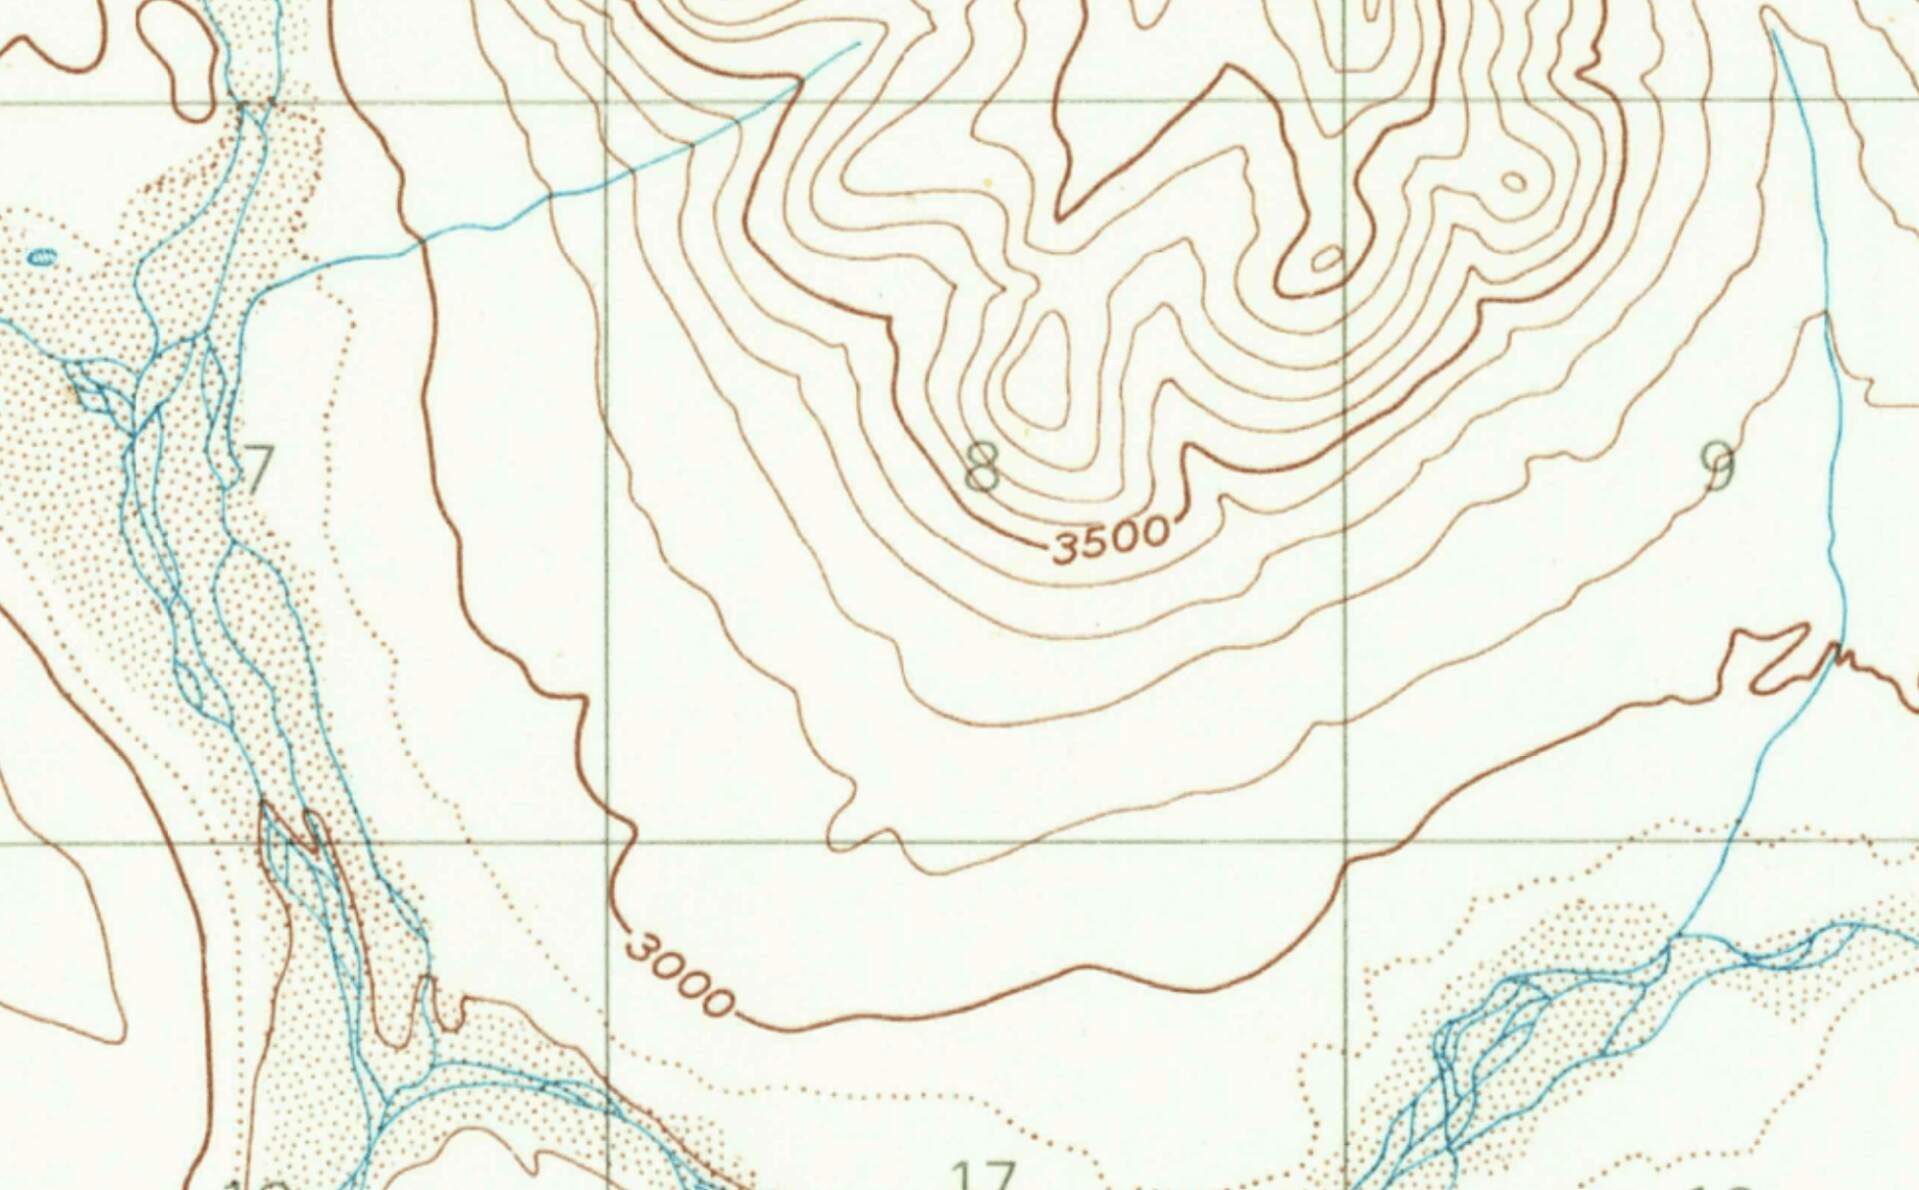 AC Image Backcountry Navigation Topo with zoomed in topo lines